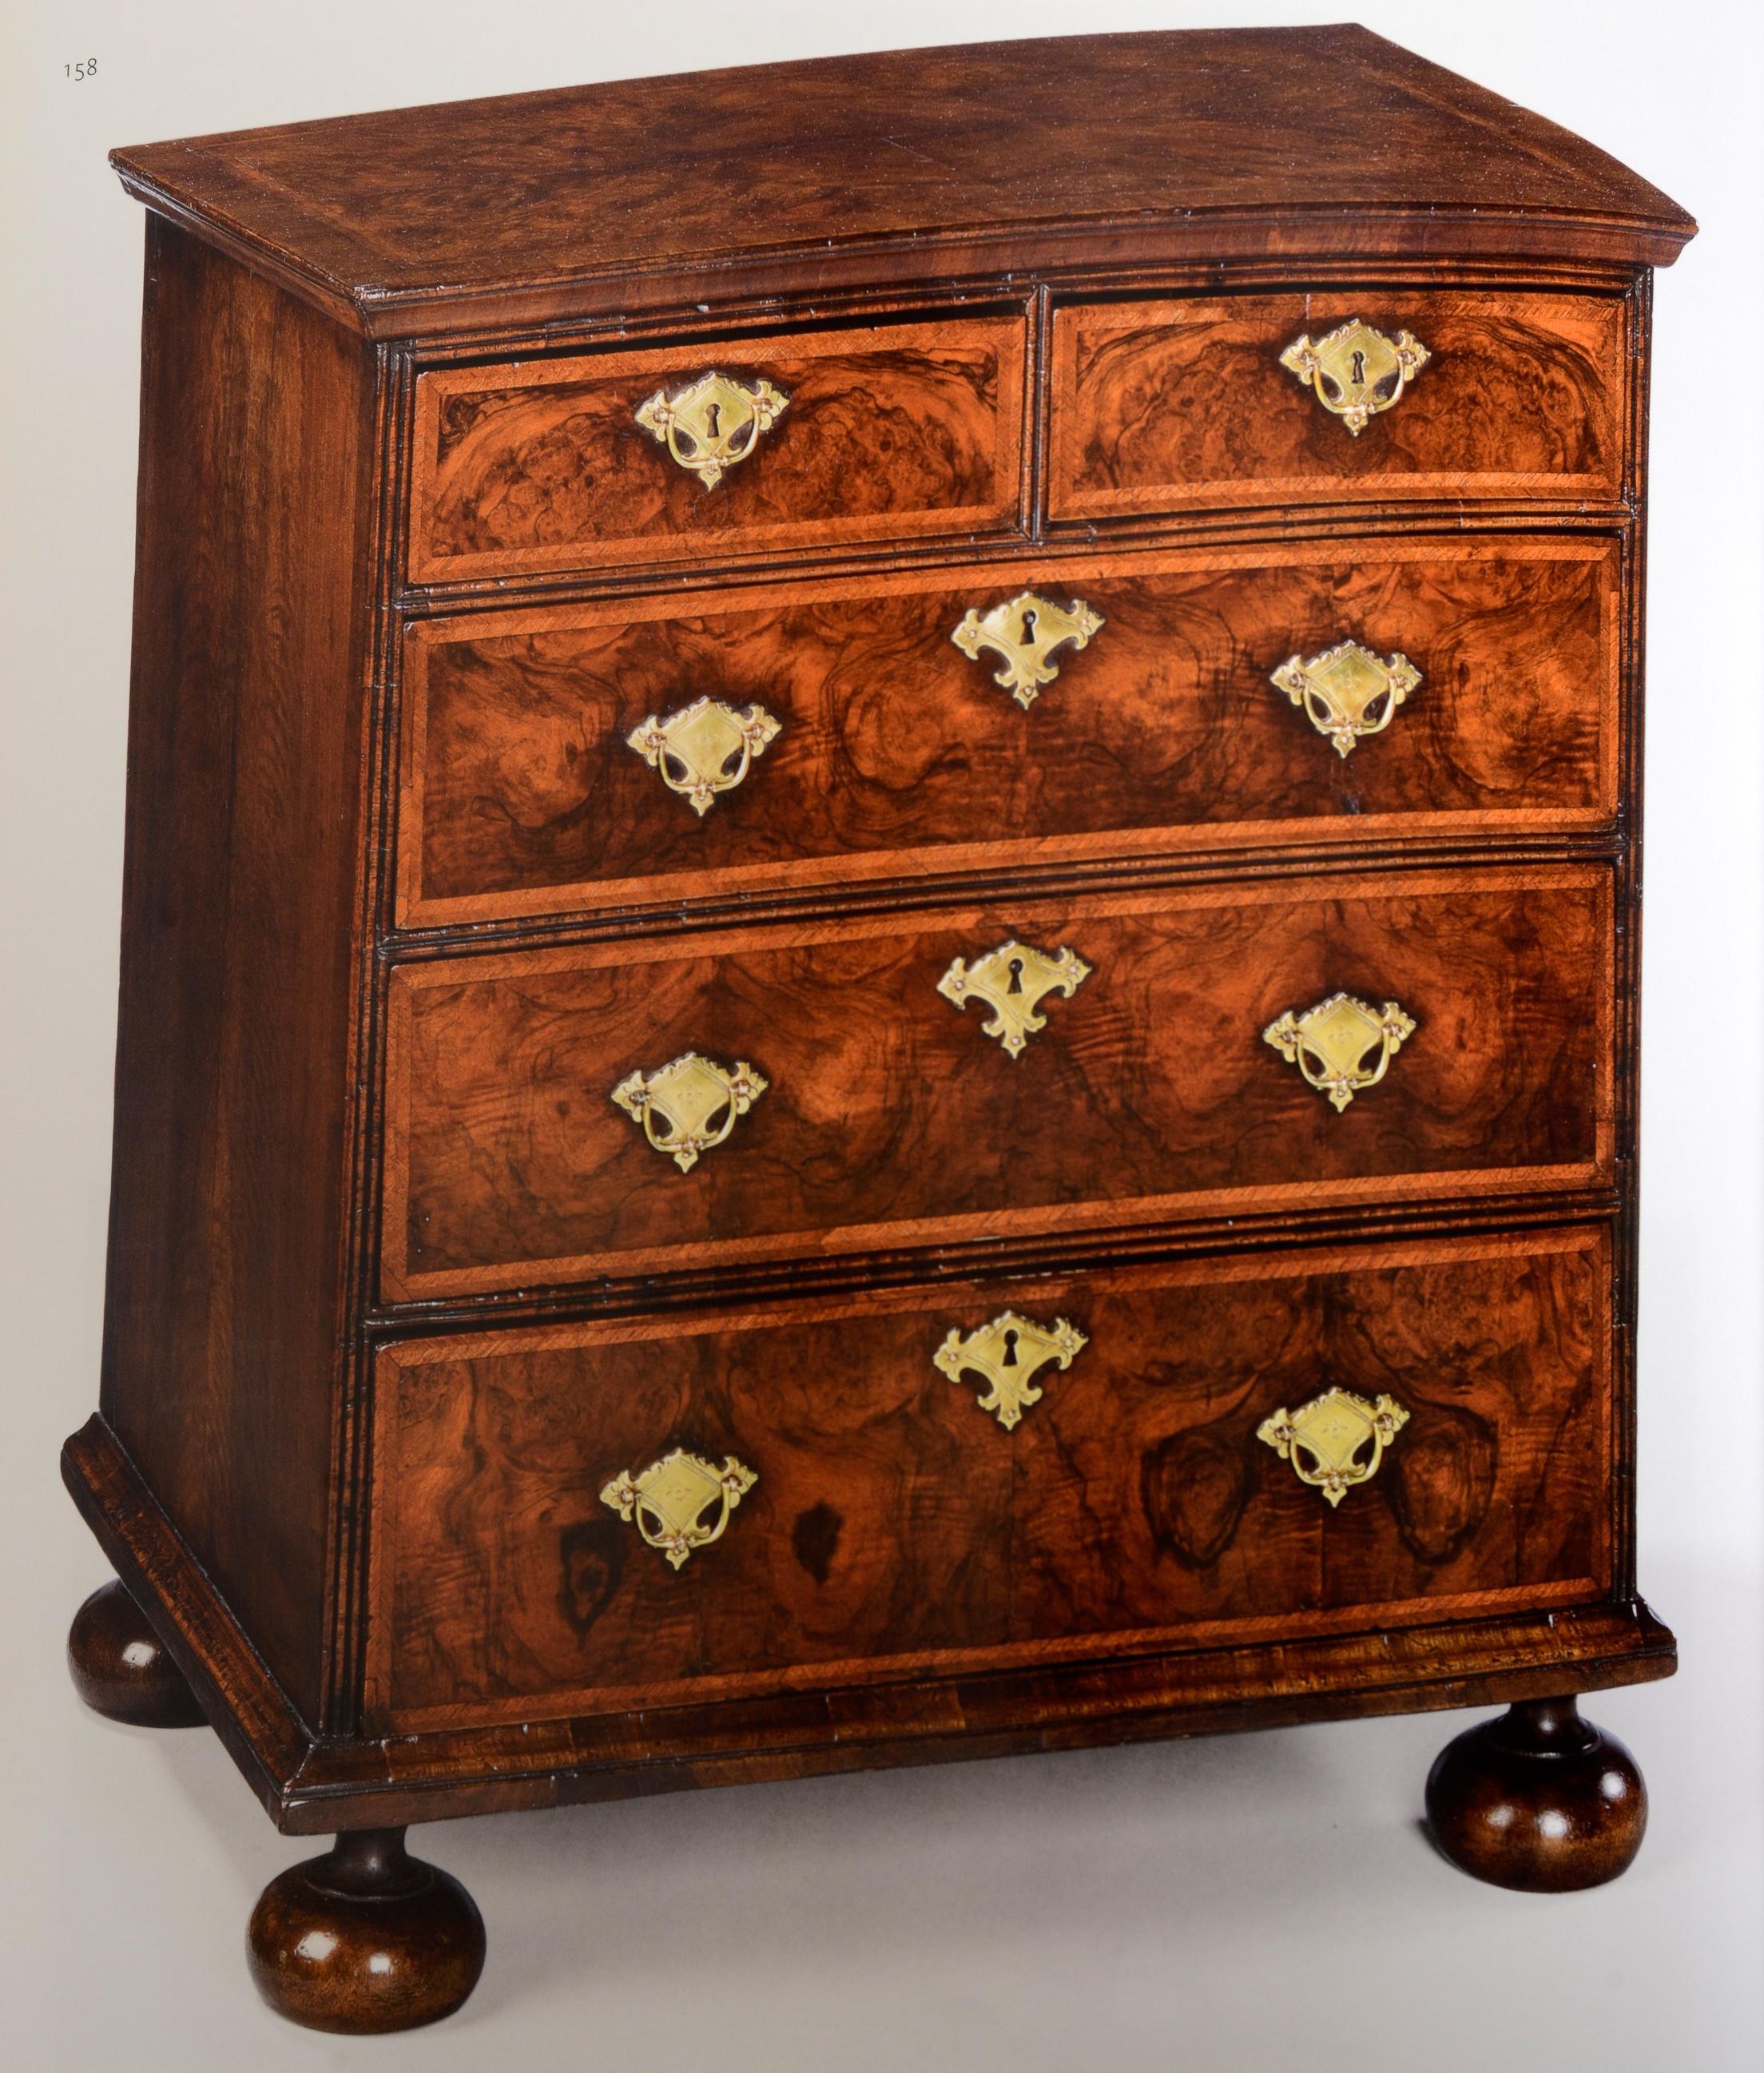 Exceptional Furniture & Works of Art by Mallett & Son Antiques, First Edition For Sale 12